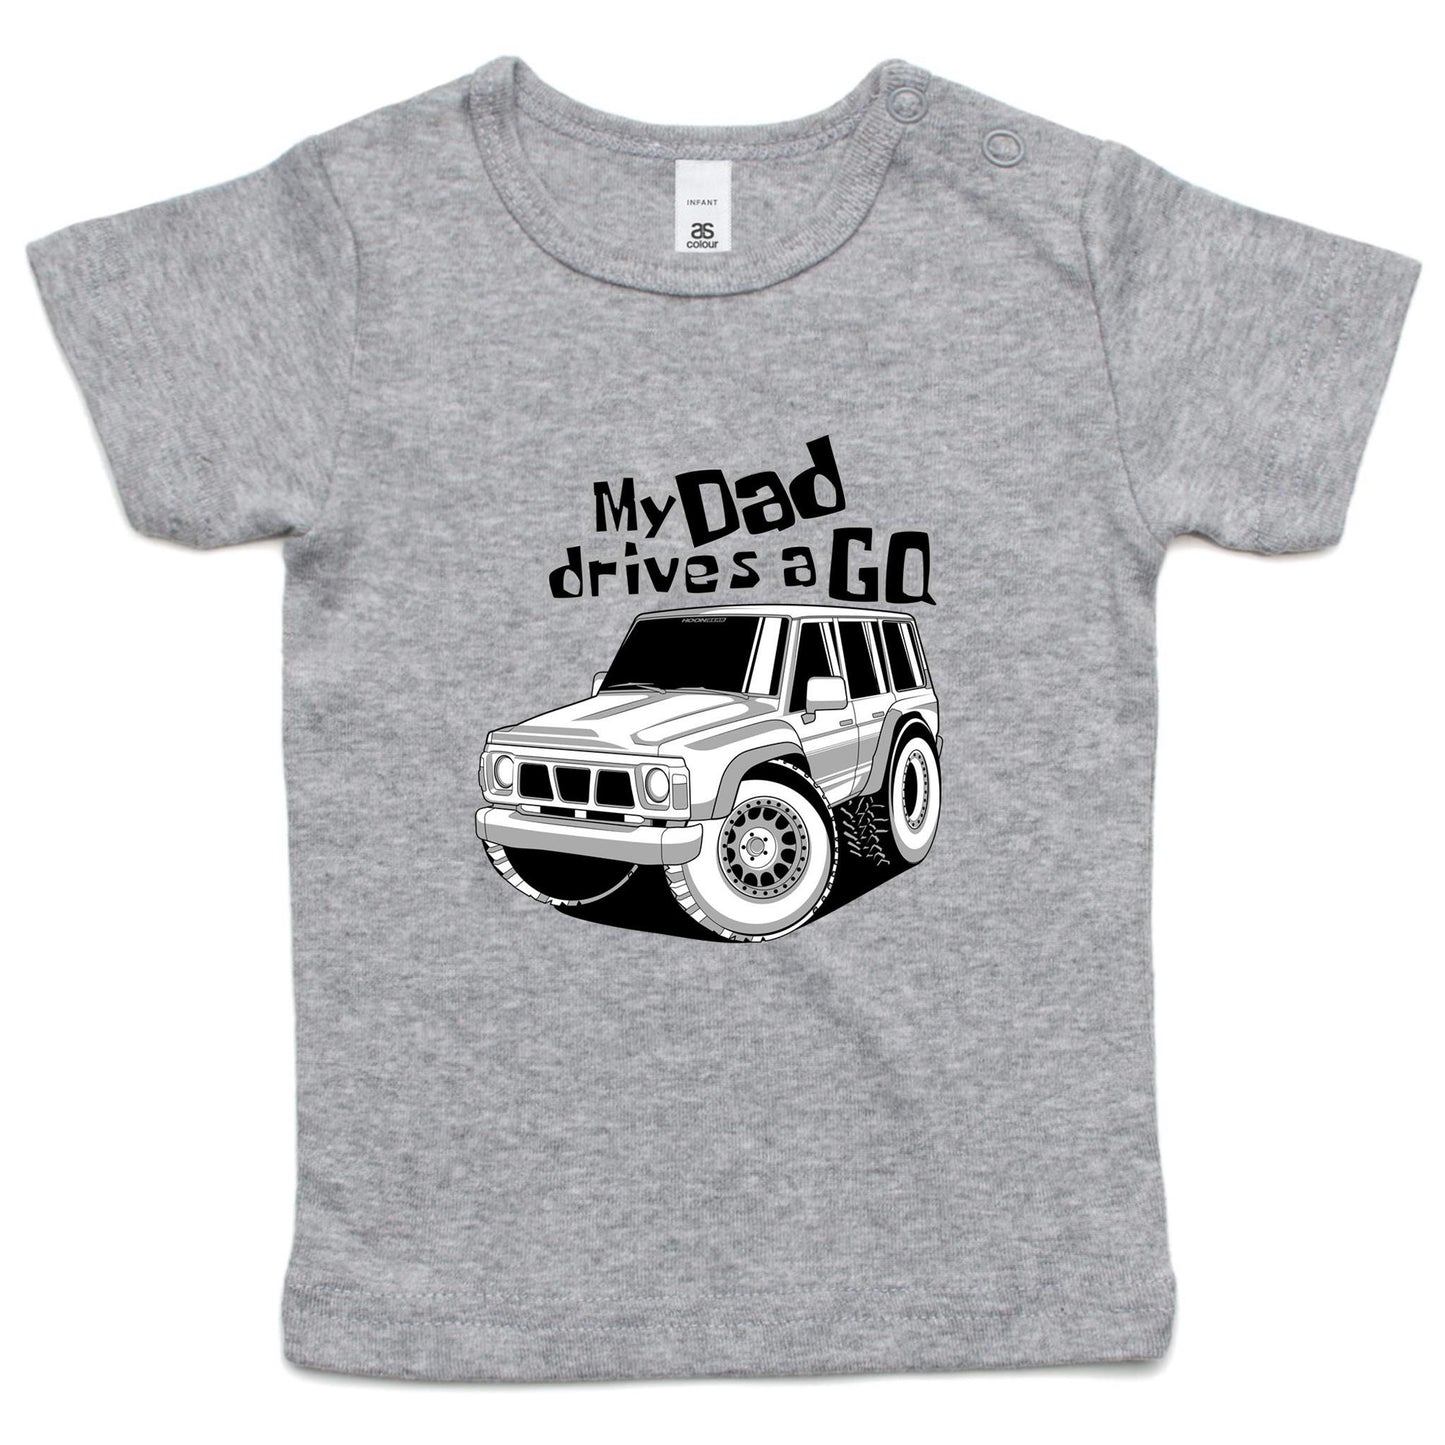 My Dad/Mum drives and GQ - Infant Wee Tee